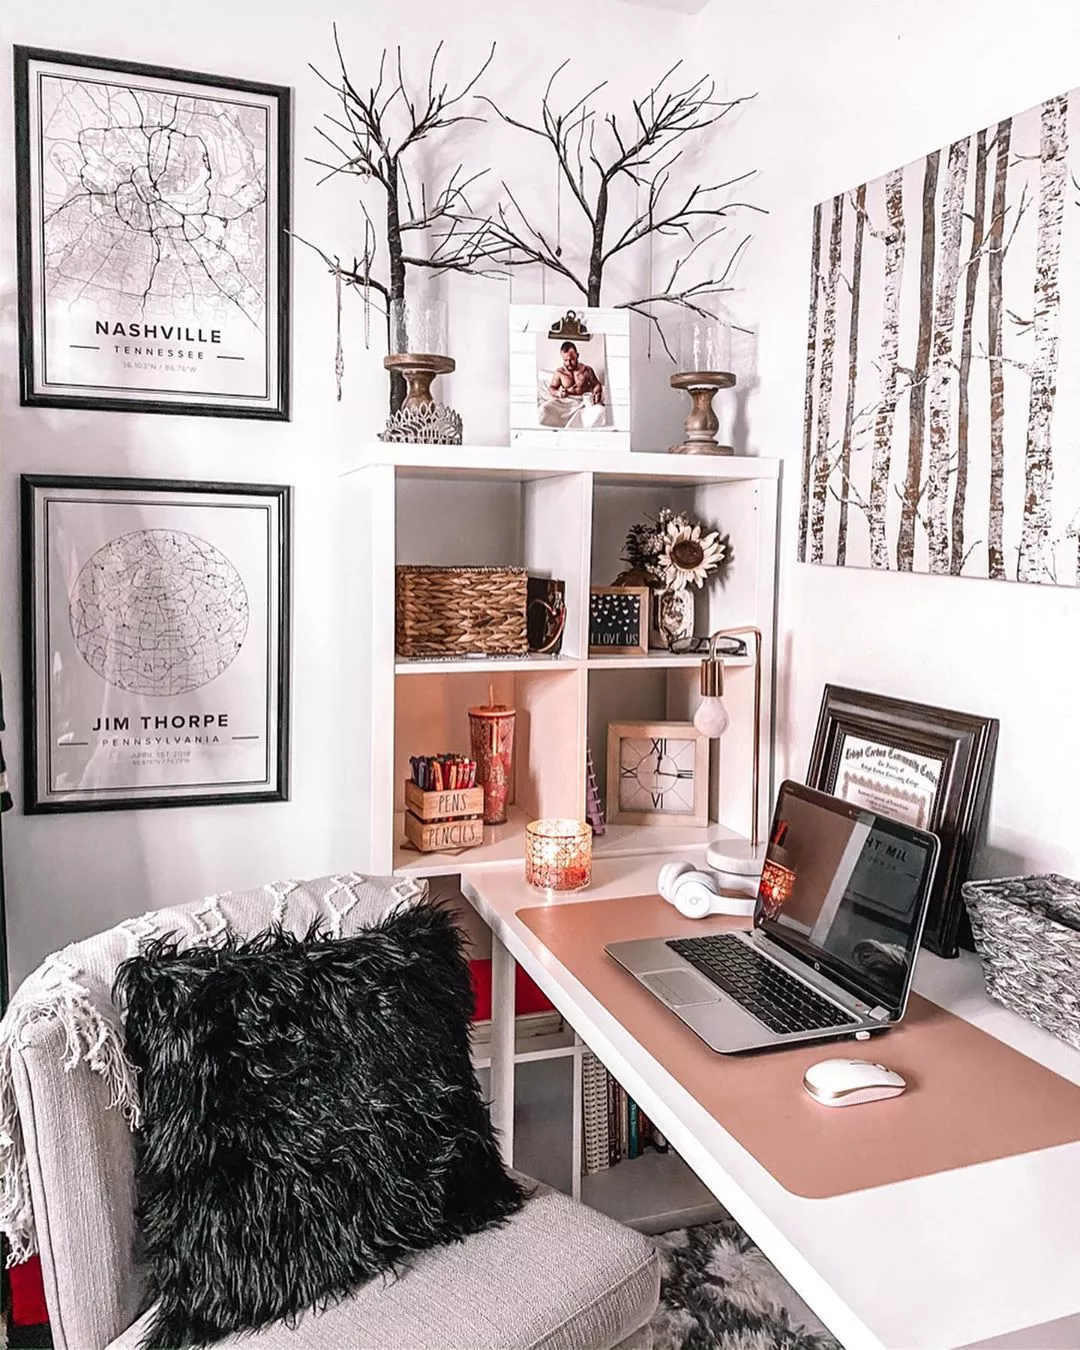 How to make use of small spaces with office storage furniture